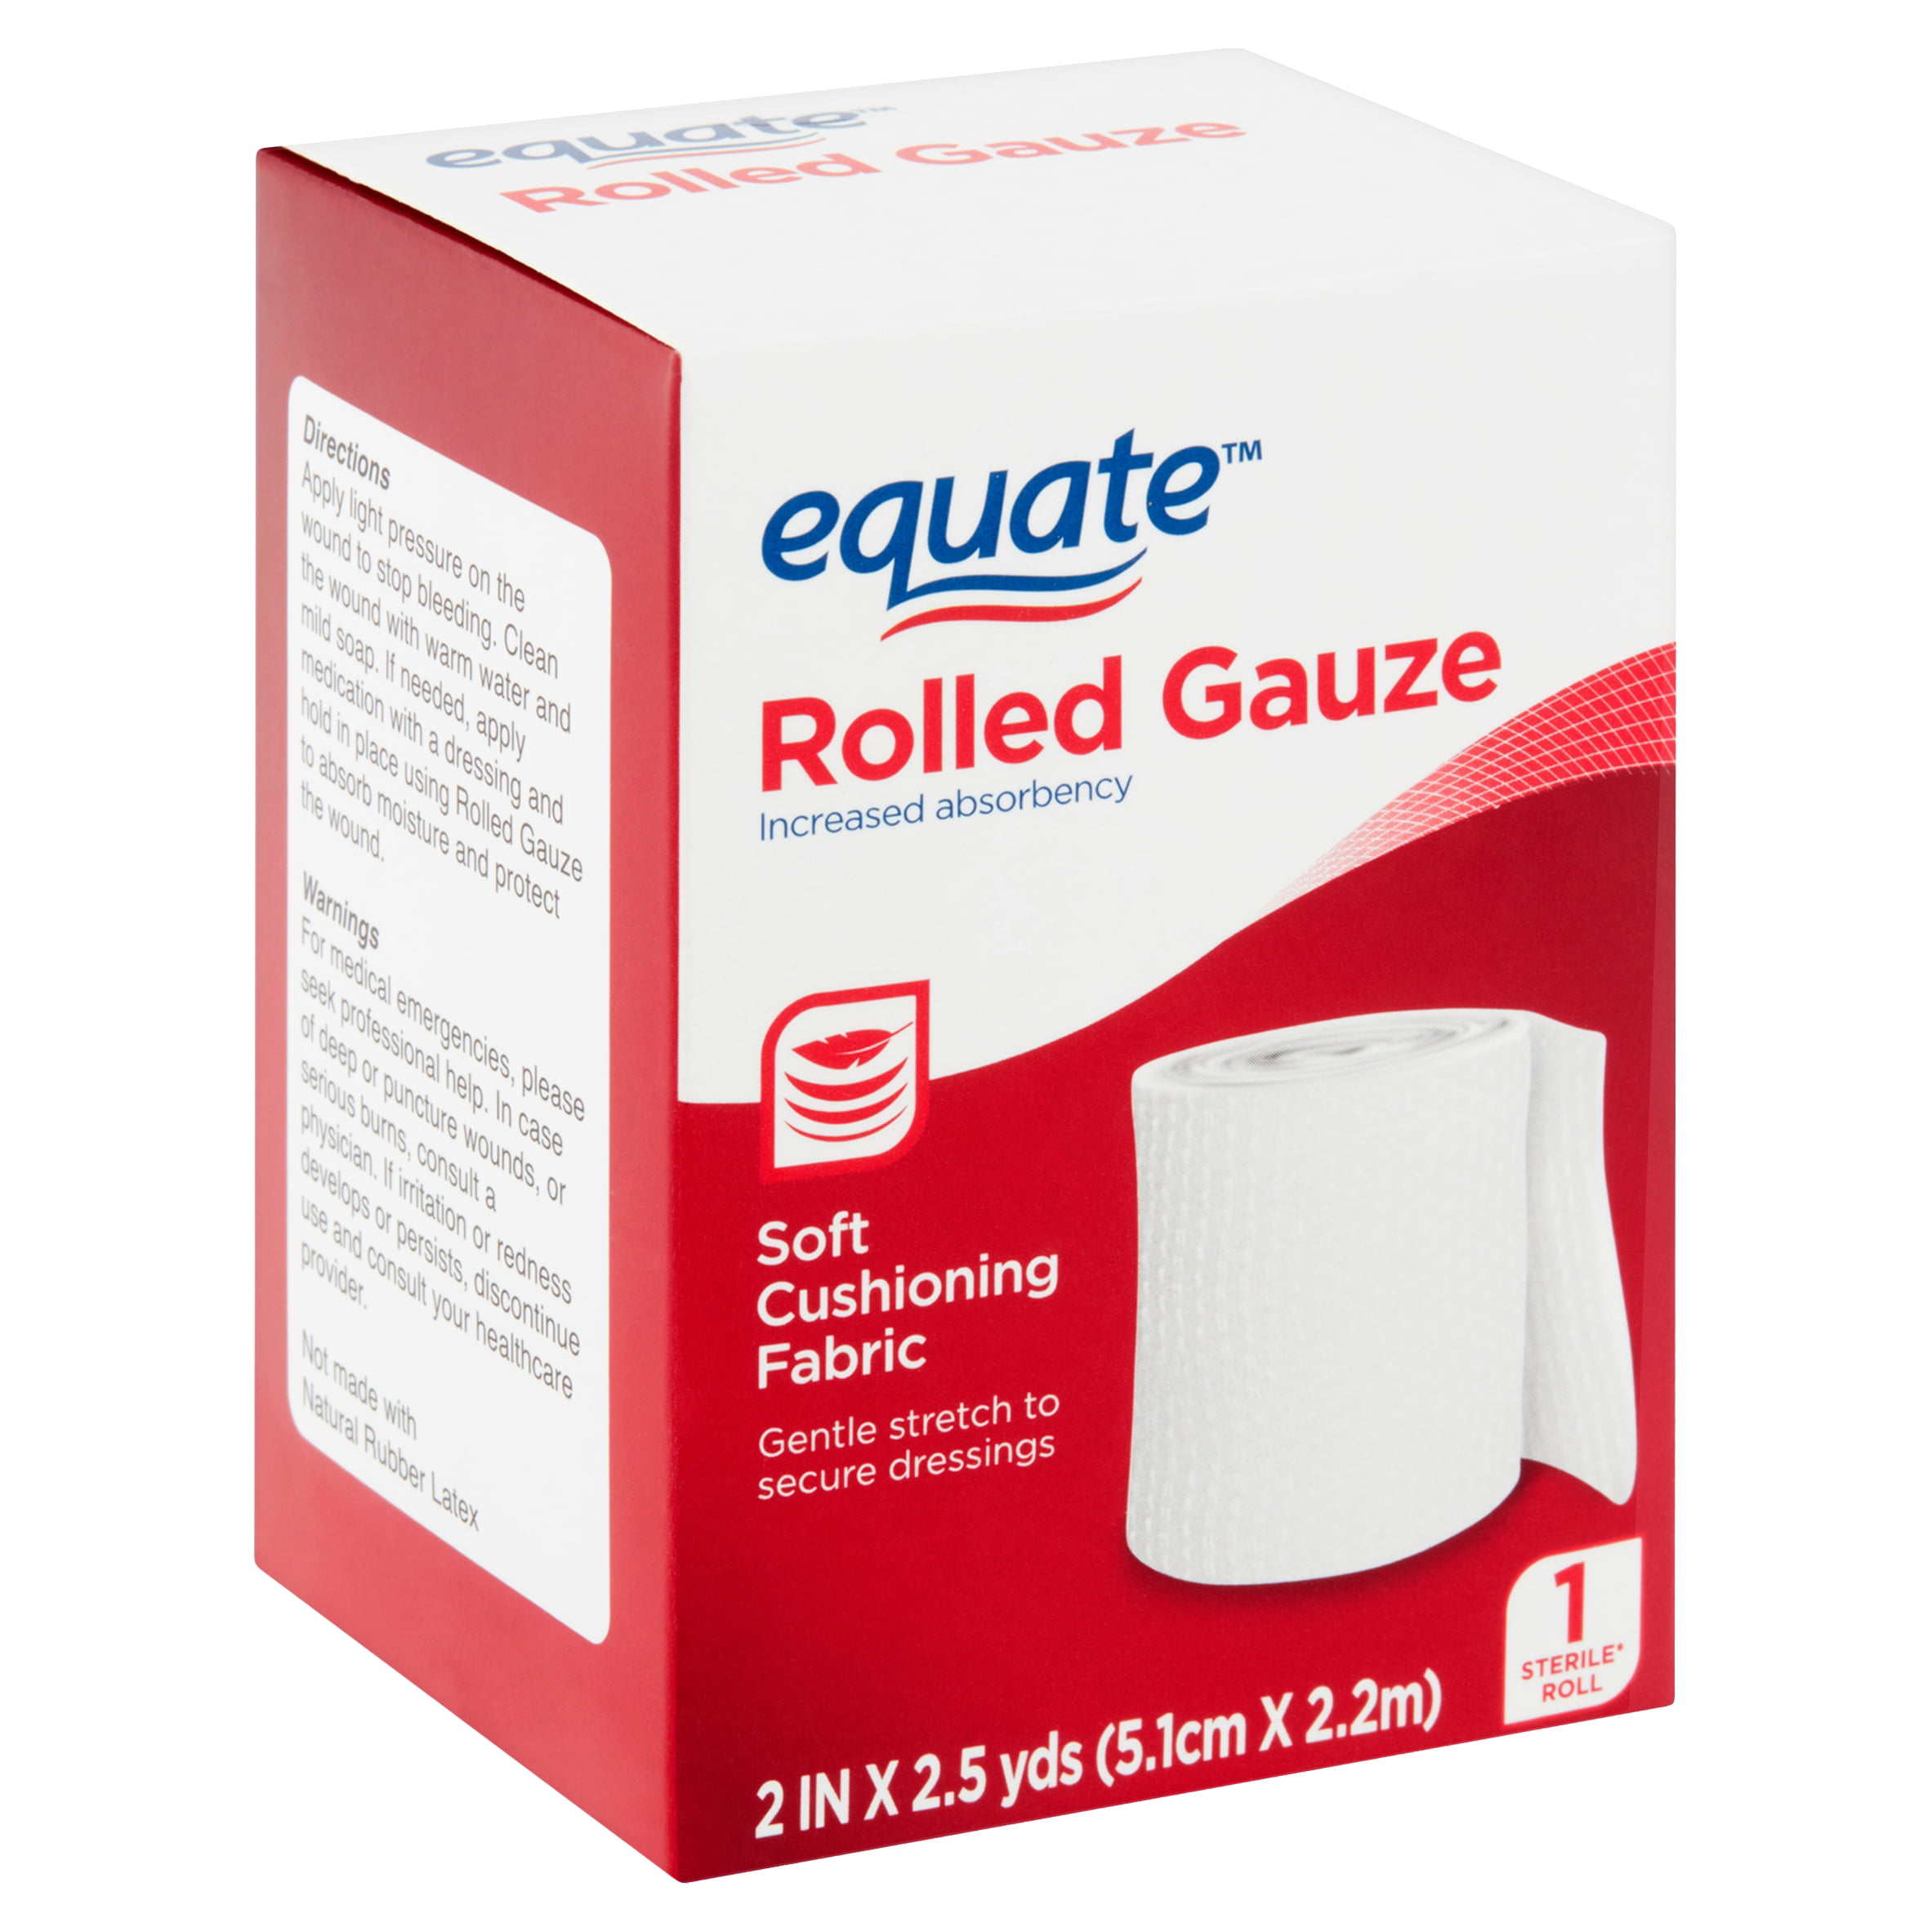 Equate Rolled Gauze, 2 inches X 2.5 yards, 1 Count